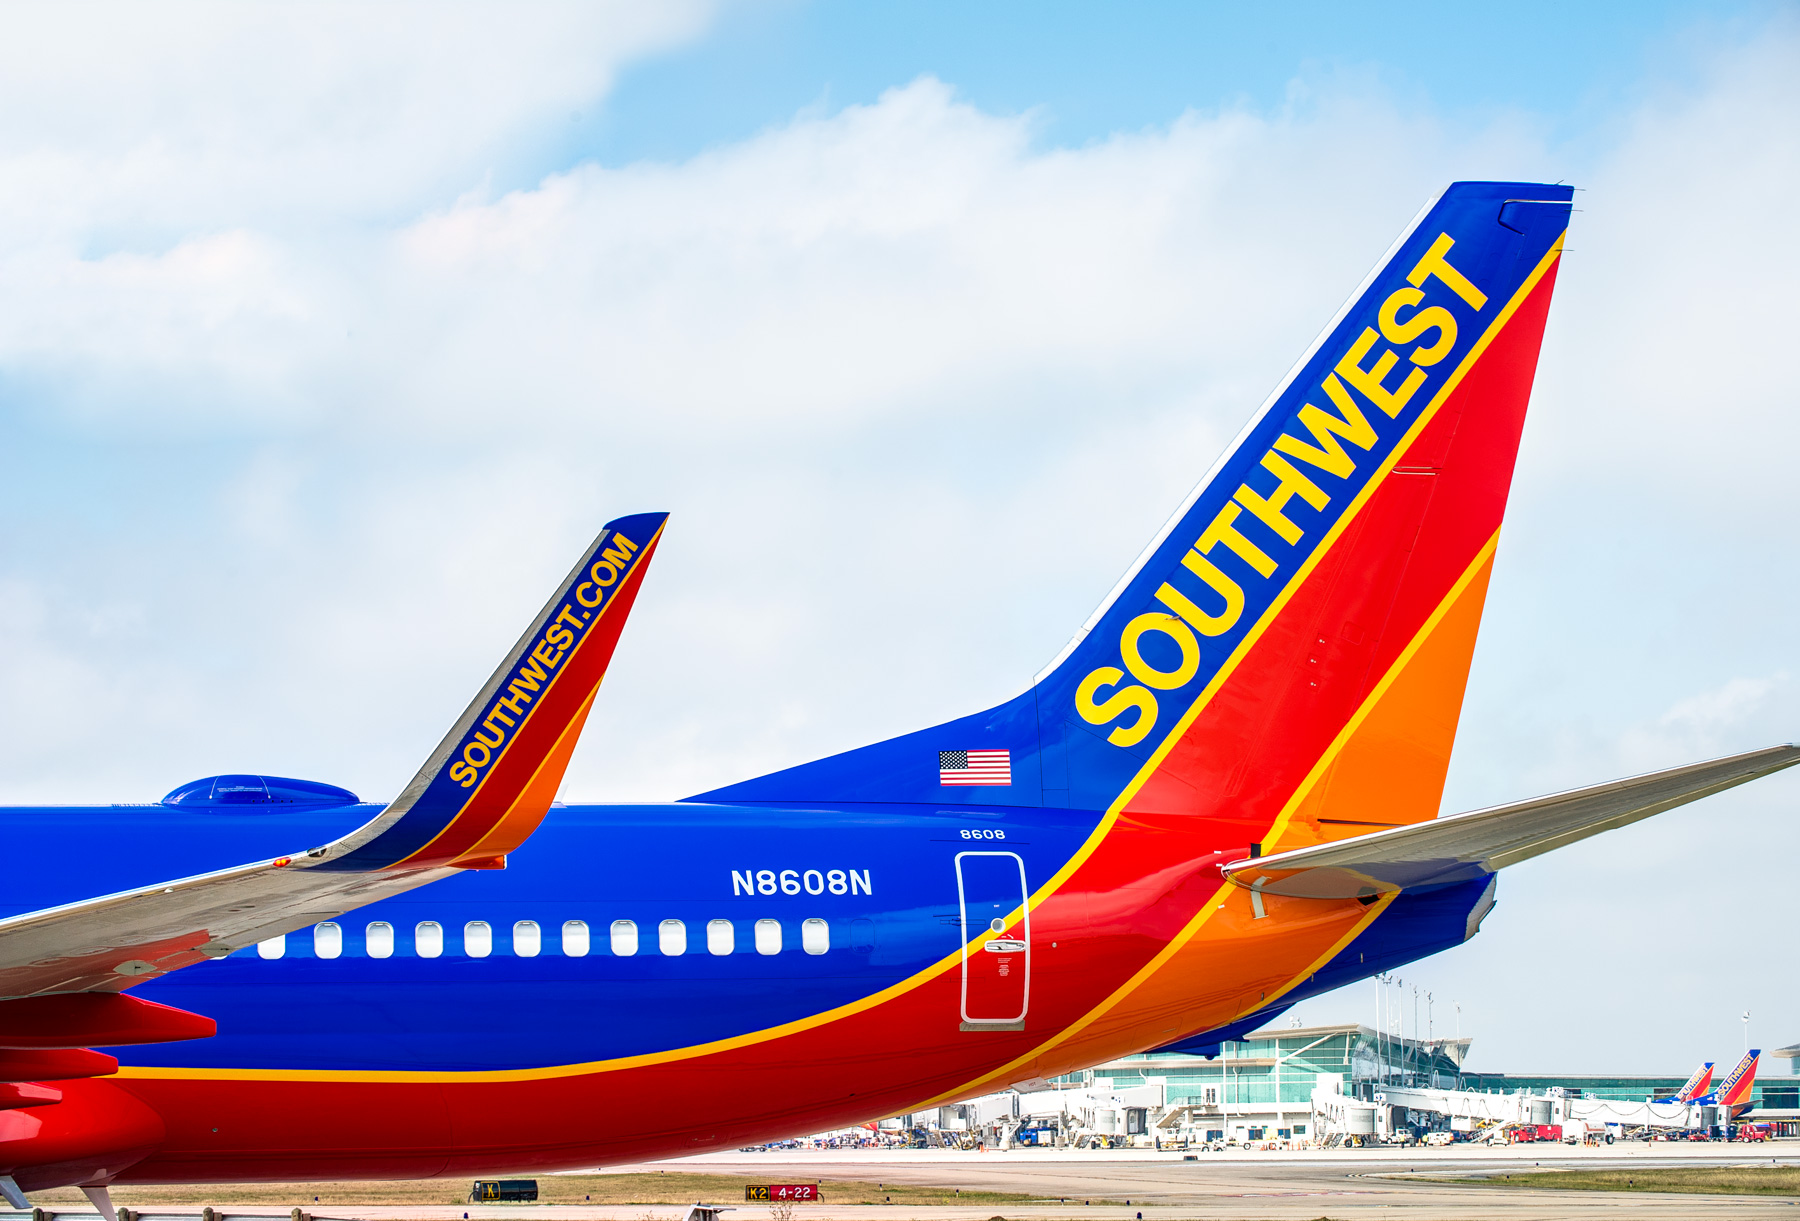 Where can you buy tickets for Southwest airlines?